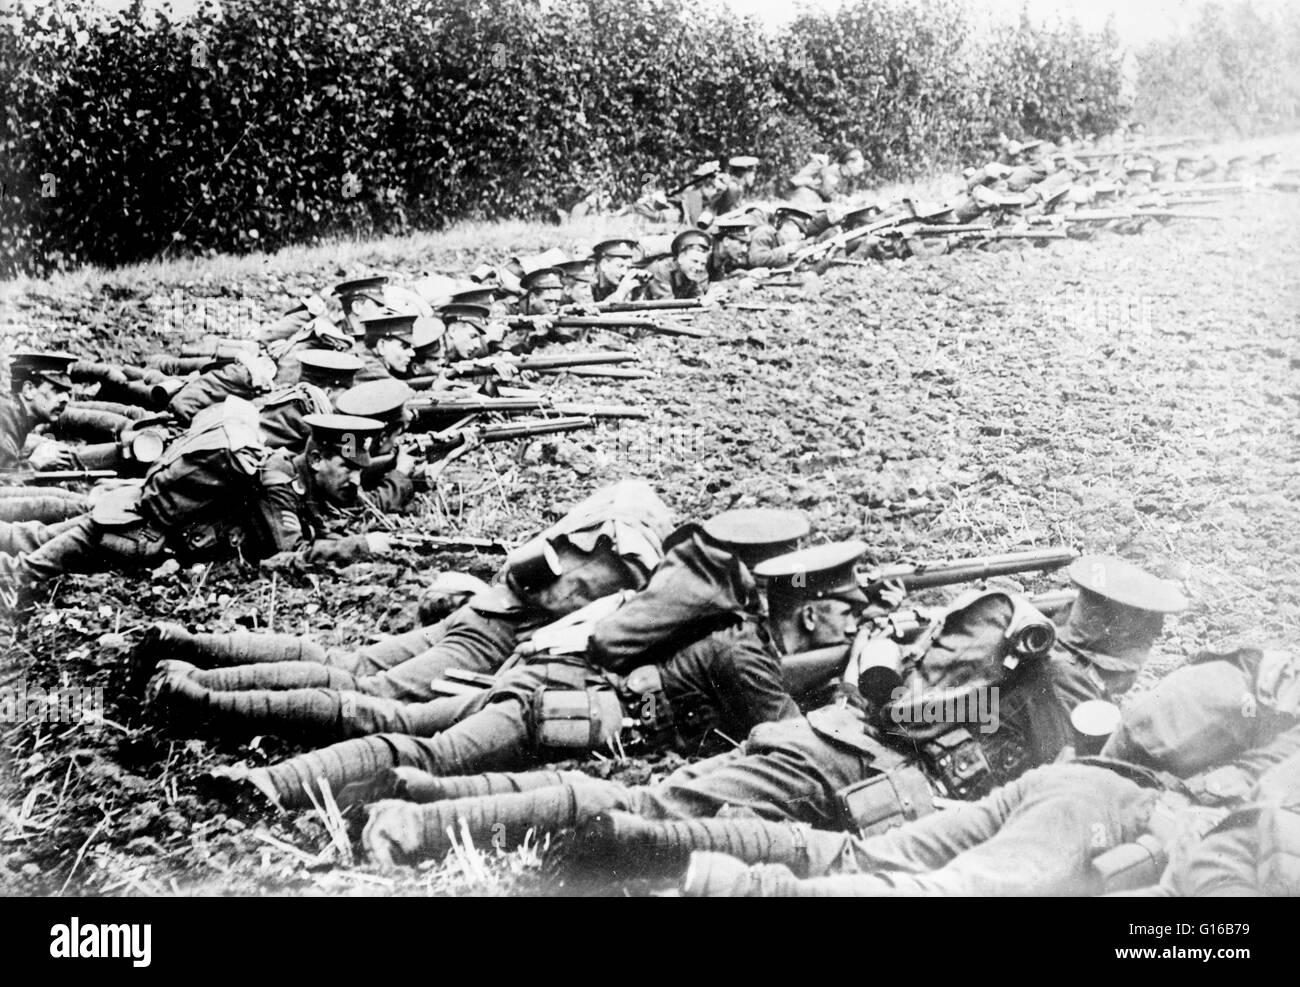 English infantry soldiers during World War I. During the war, there were three distinct British Armies. The first army was the small volunteer force of 400,000 soldiers, over half of which were posted overseas to garrison the British Empire. This included Stock Photo